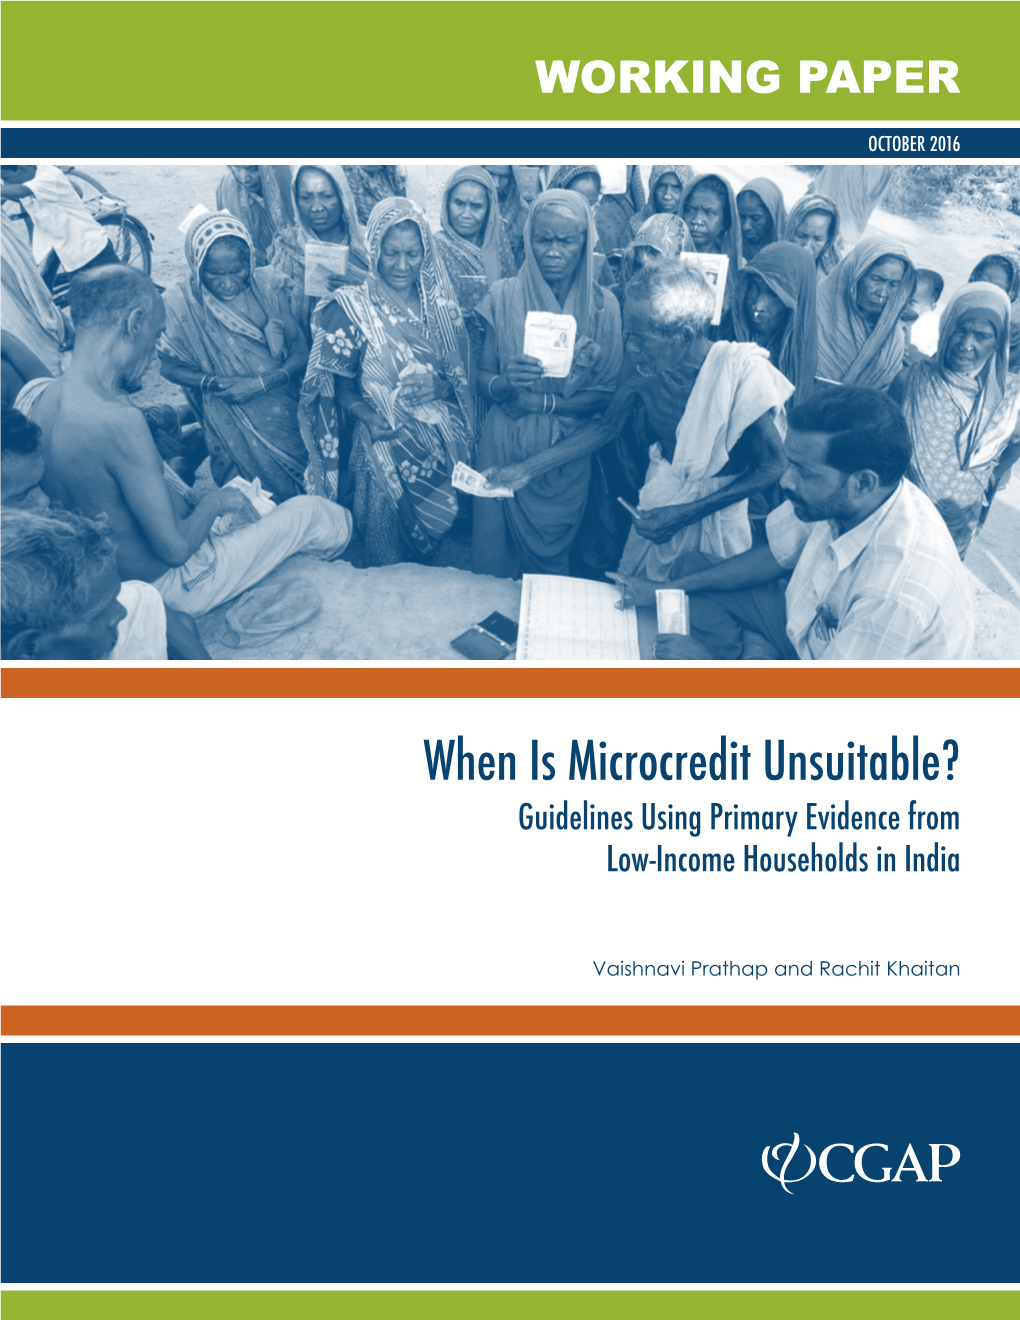 When Is Microcredit Unsuitable? Guidelines Using Primary Evidence from Low-Income Households in India